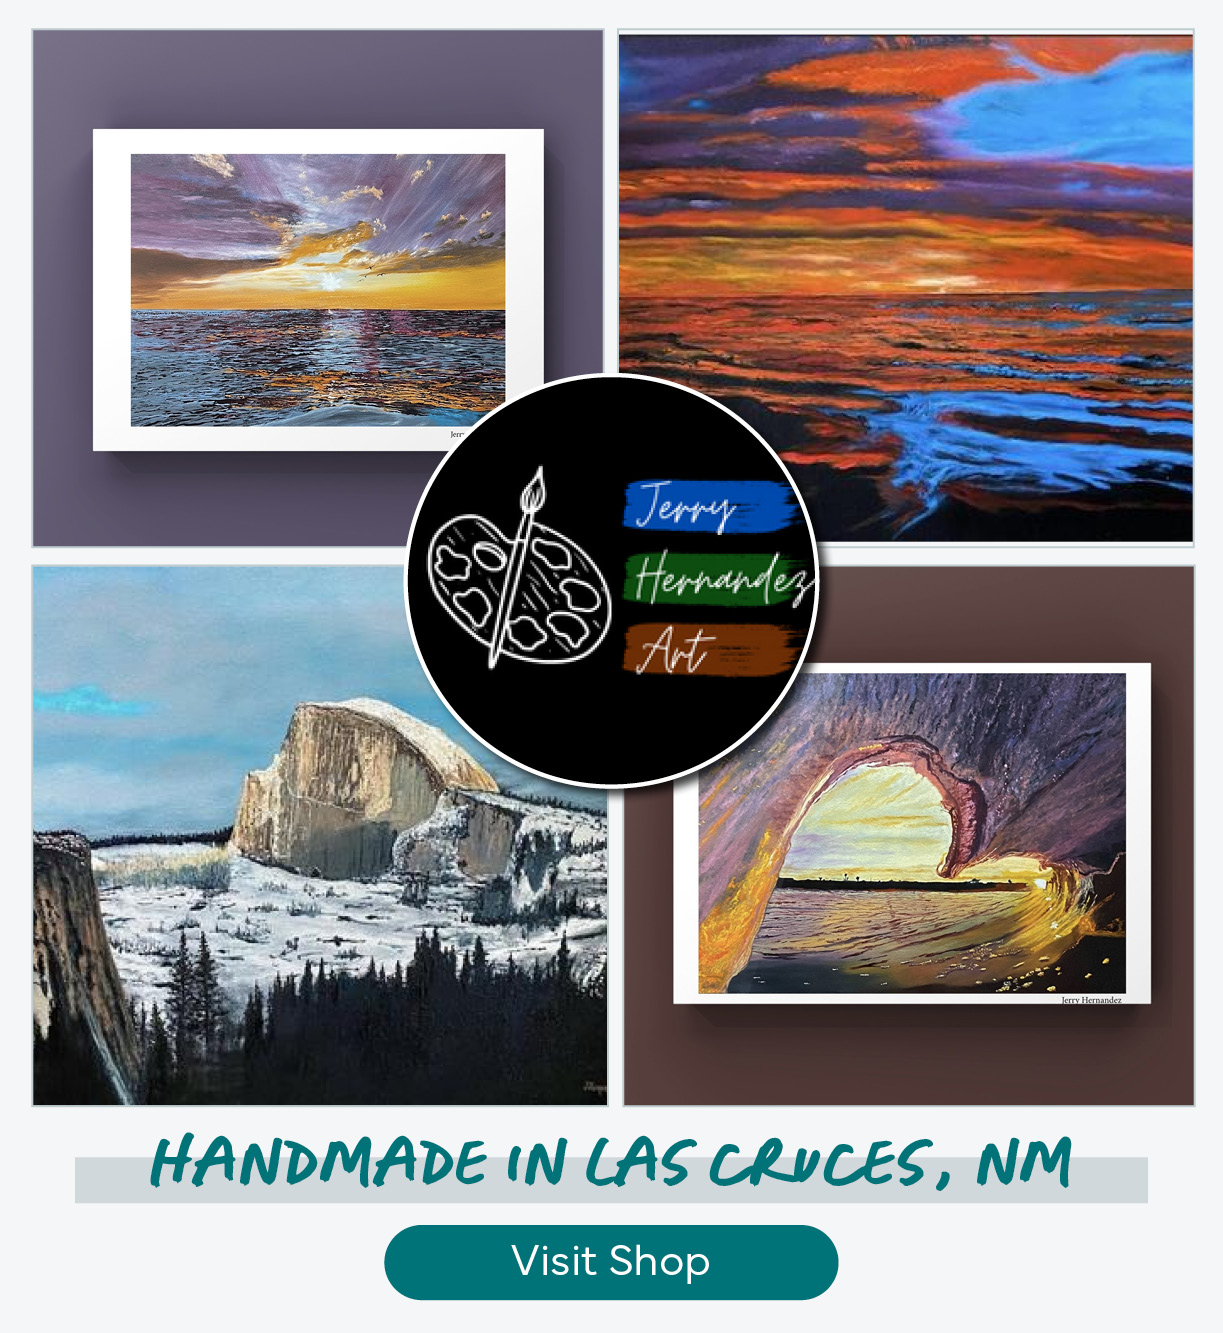 Handmade in New Mexico - Oil Paintings by Jerry Hernandez